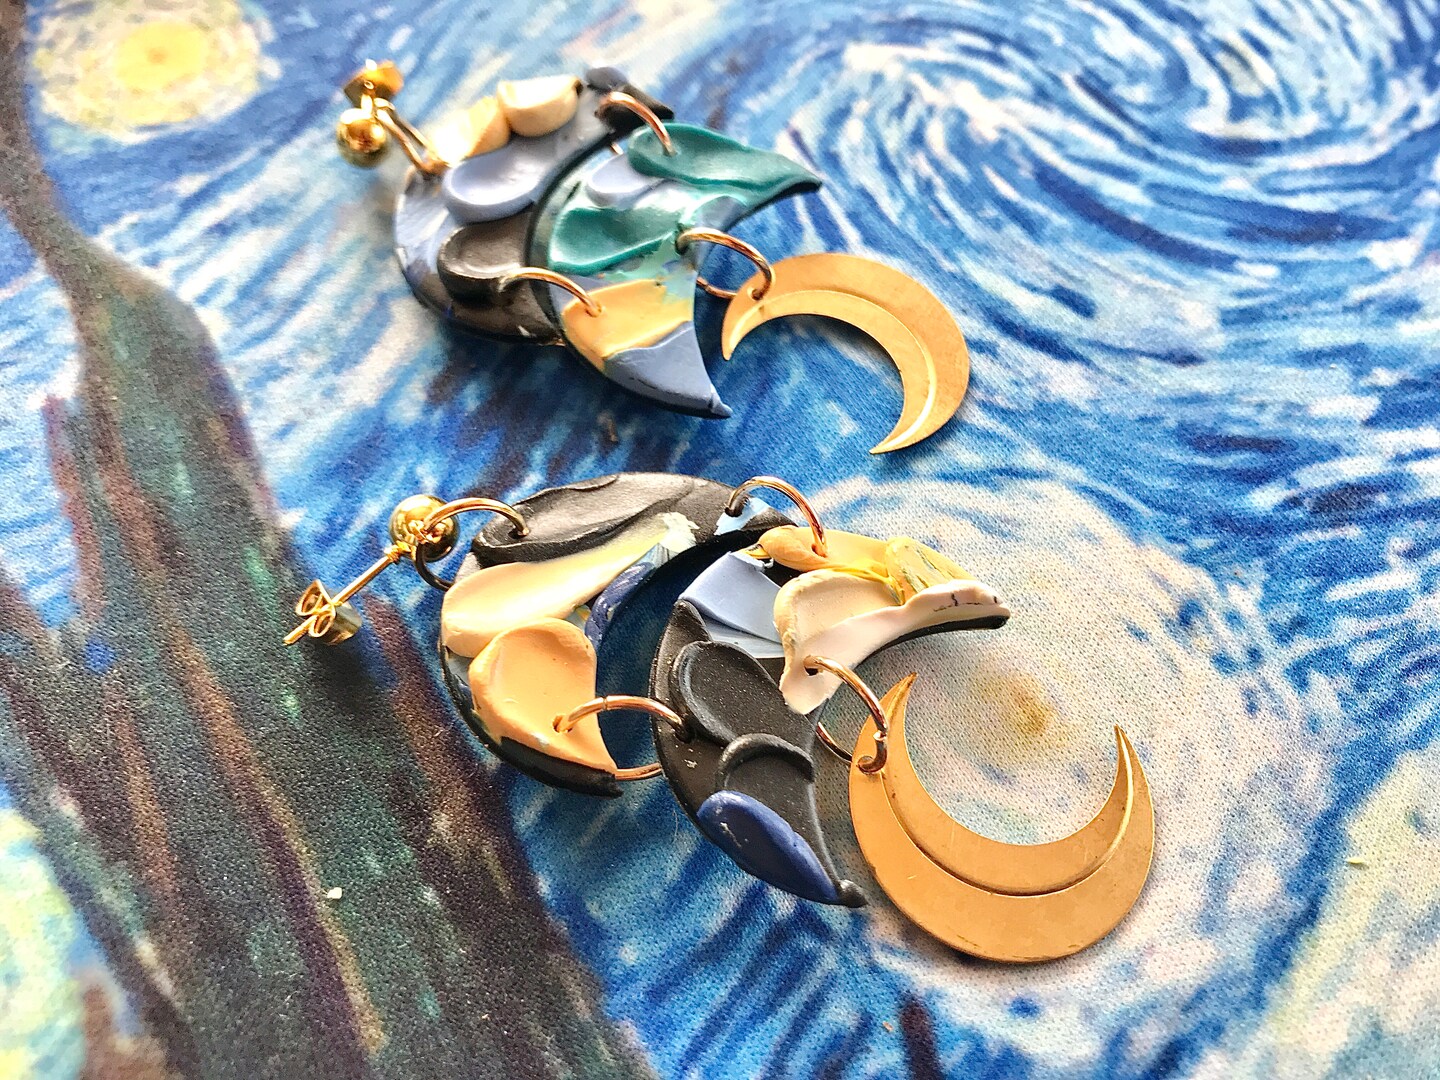 Copy-Starry Night Earrings, Vincent Van Gogh Impressionism Earring, Impasto Painting painted wearable art textured night sky moon paint earr 210988088611176448